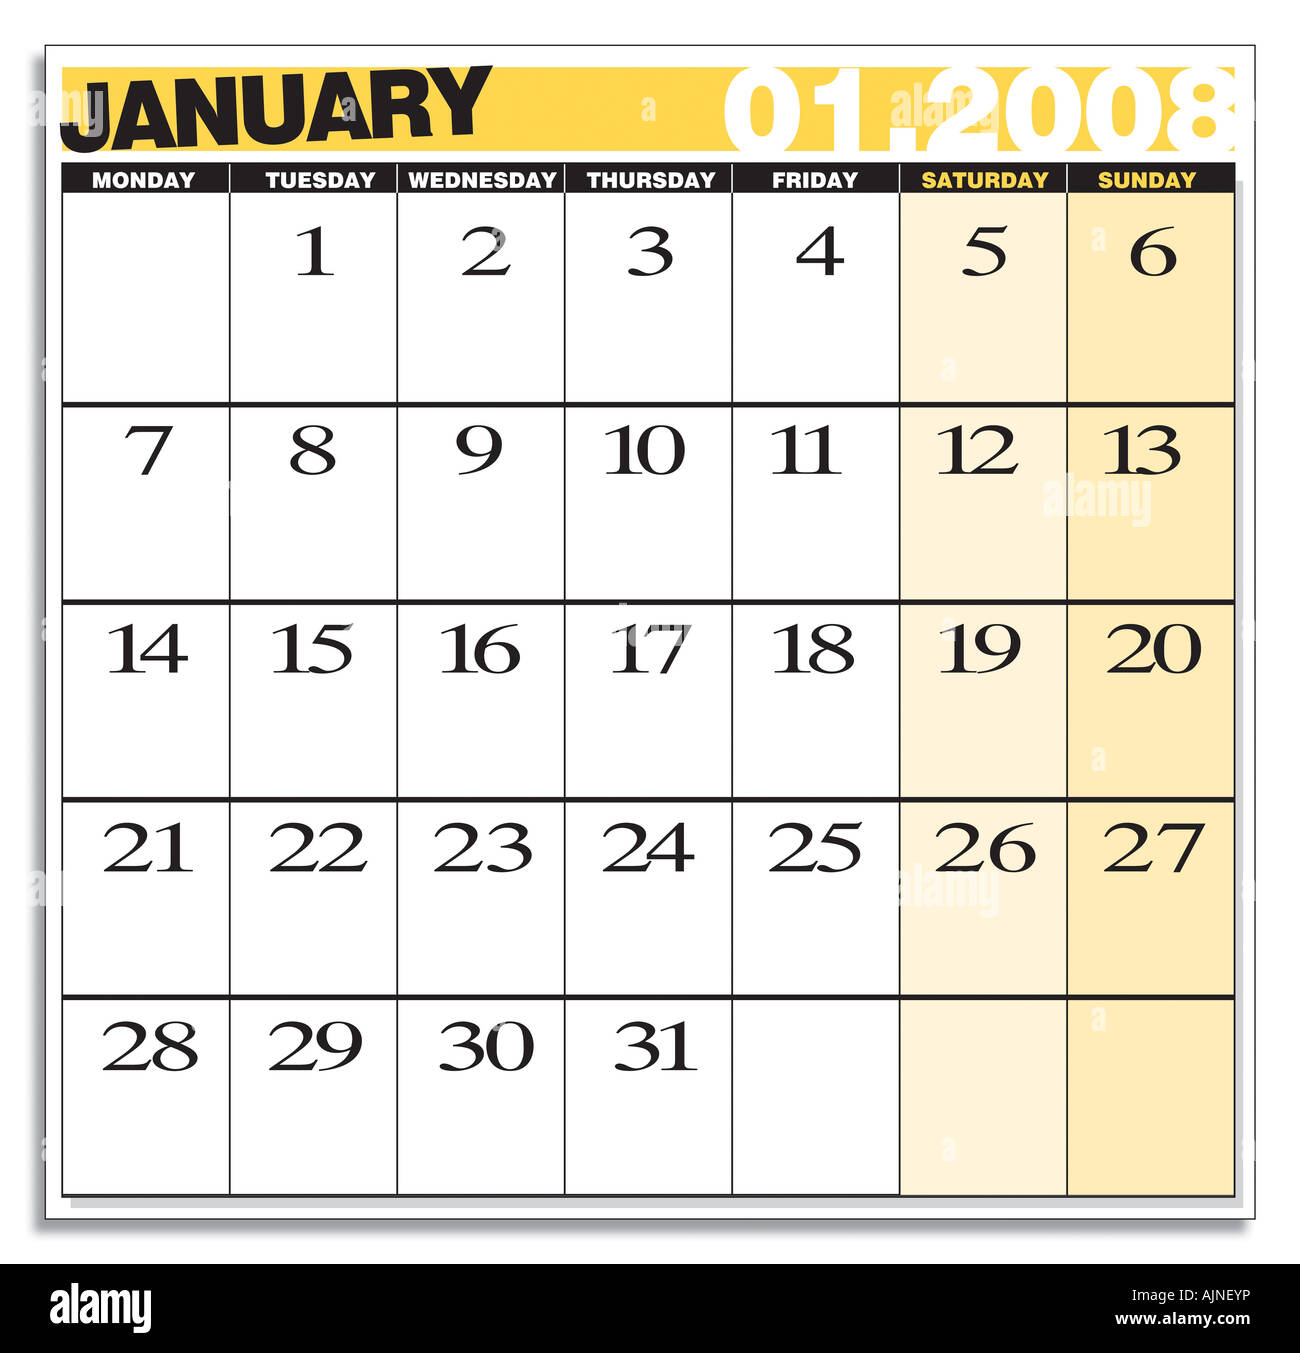 diary design and concepts january 2008 happy new year Stock Photo